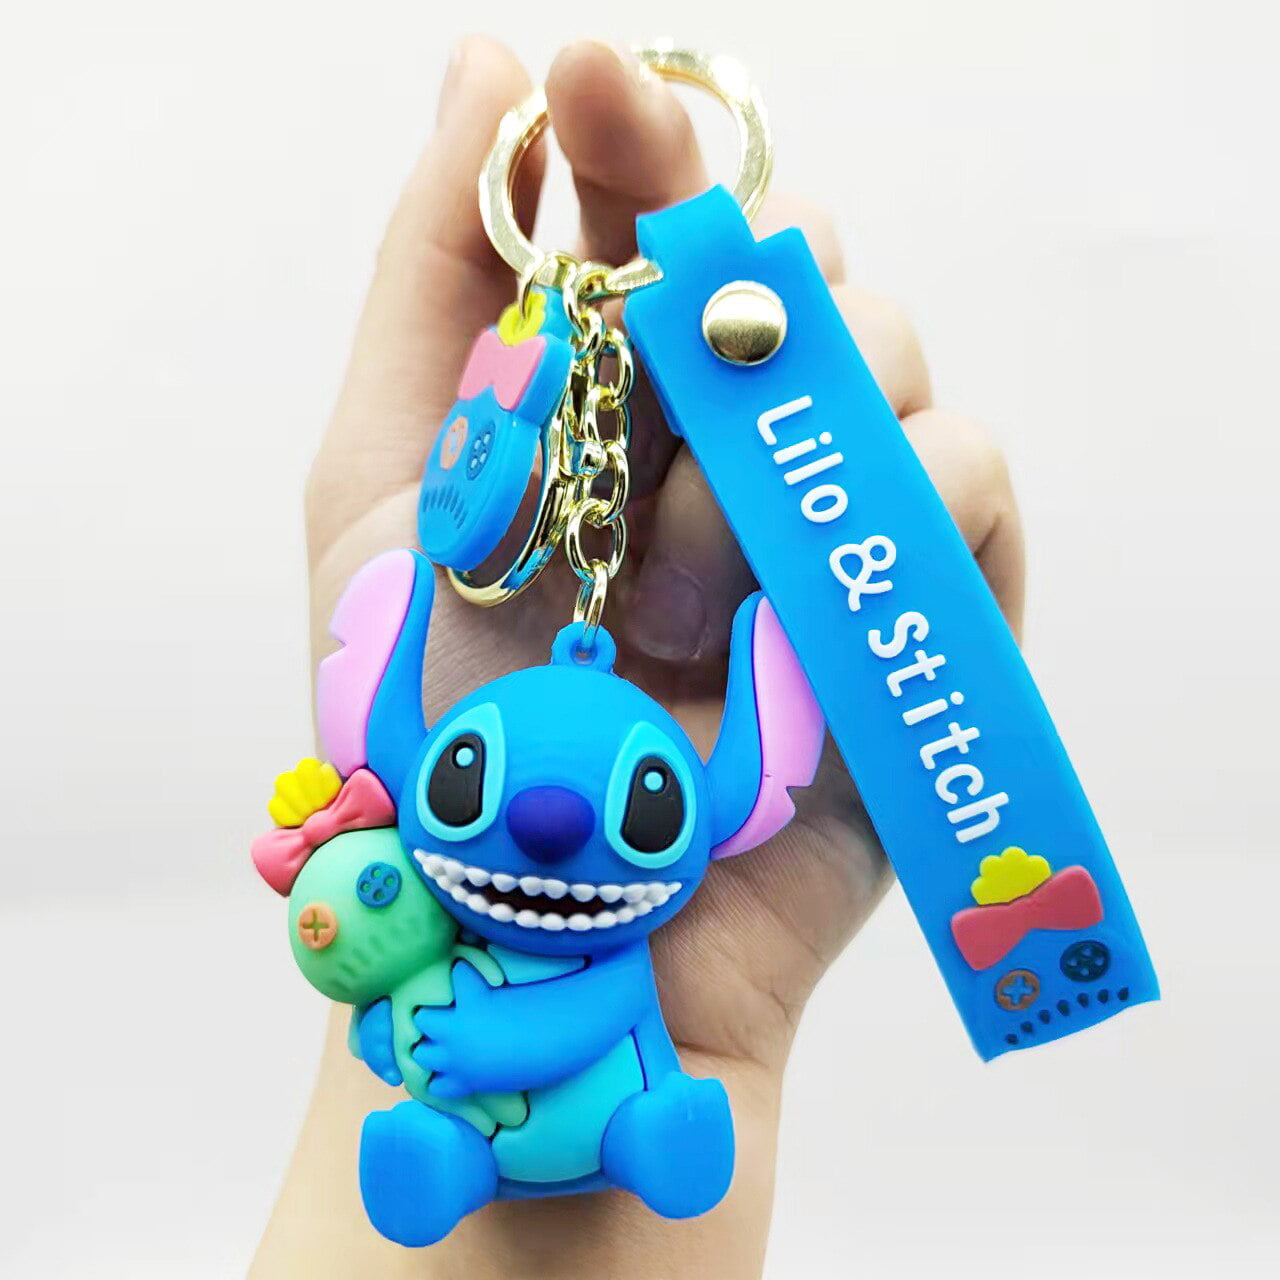 Lilo & Stitch 3D Silicone Keychain Key Chain Ring Pendant Game New